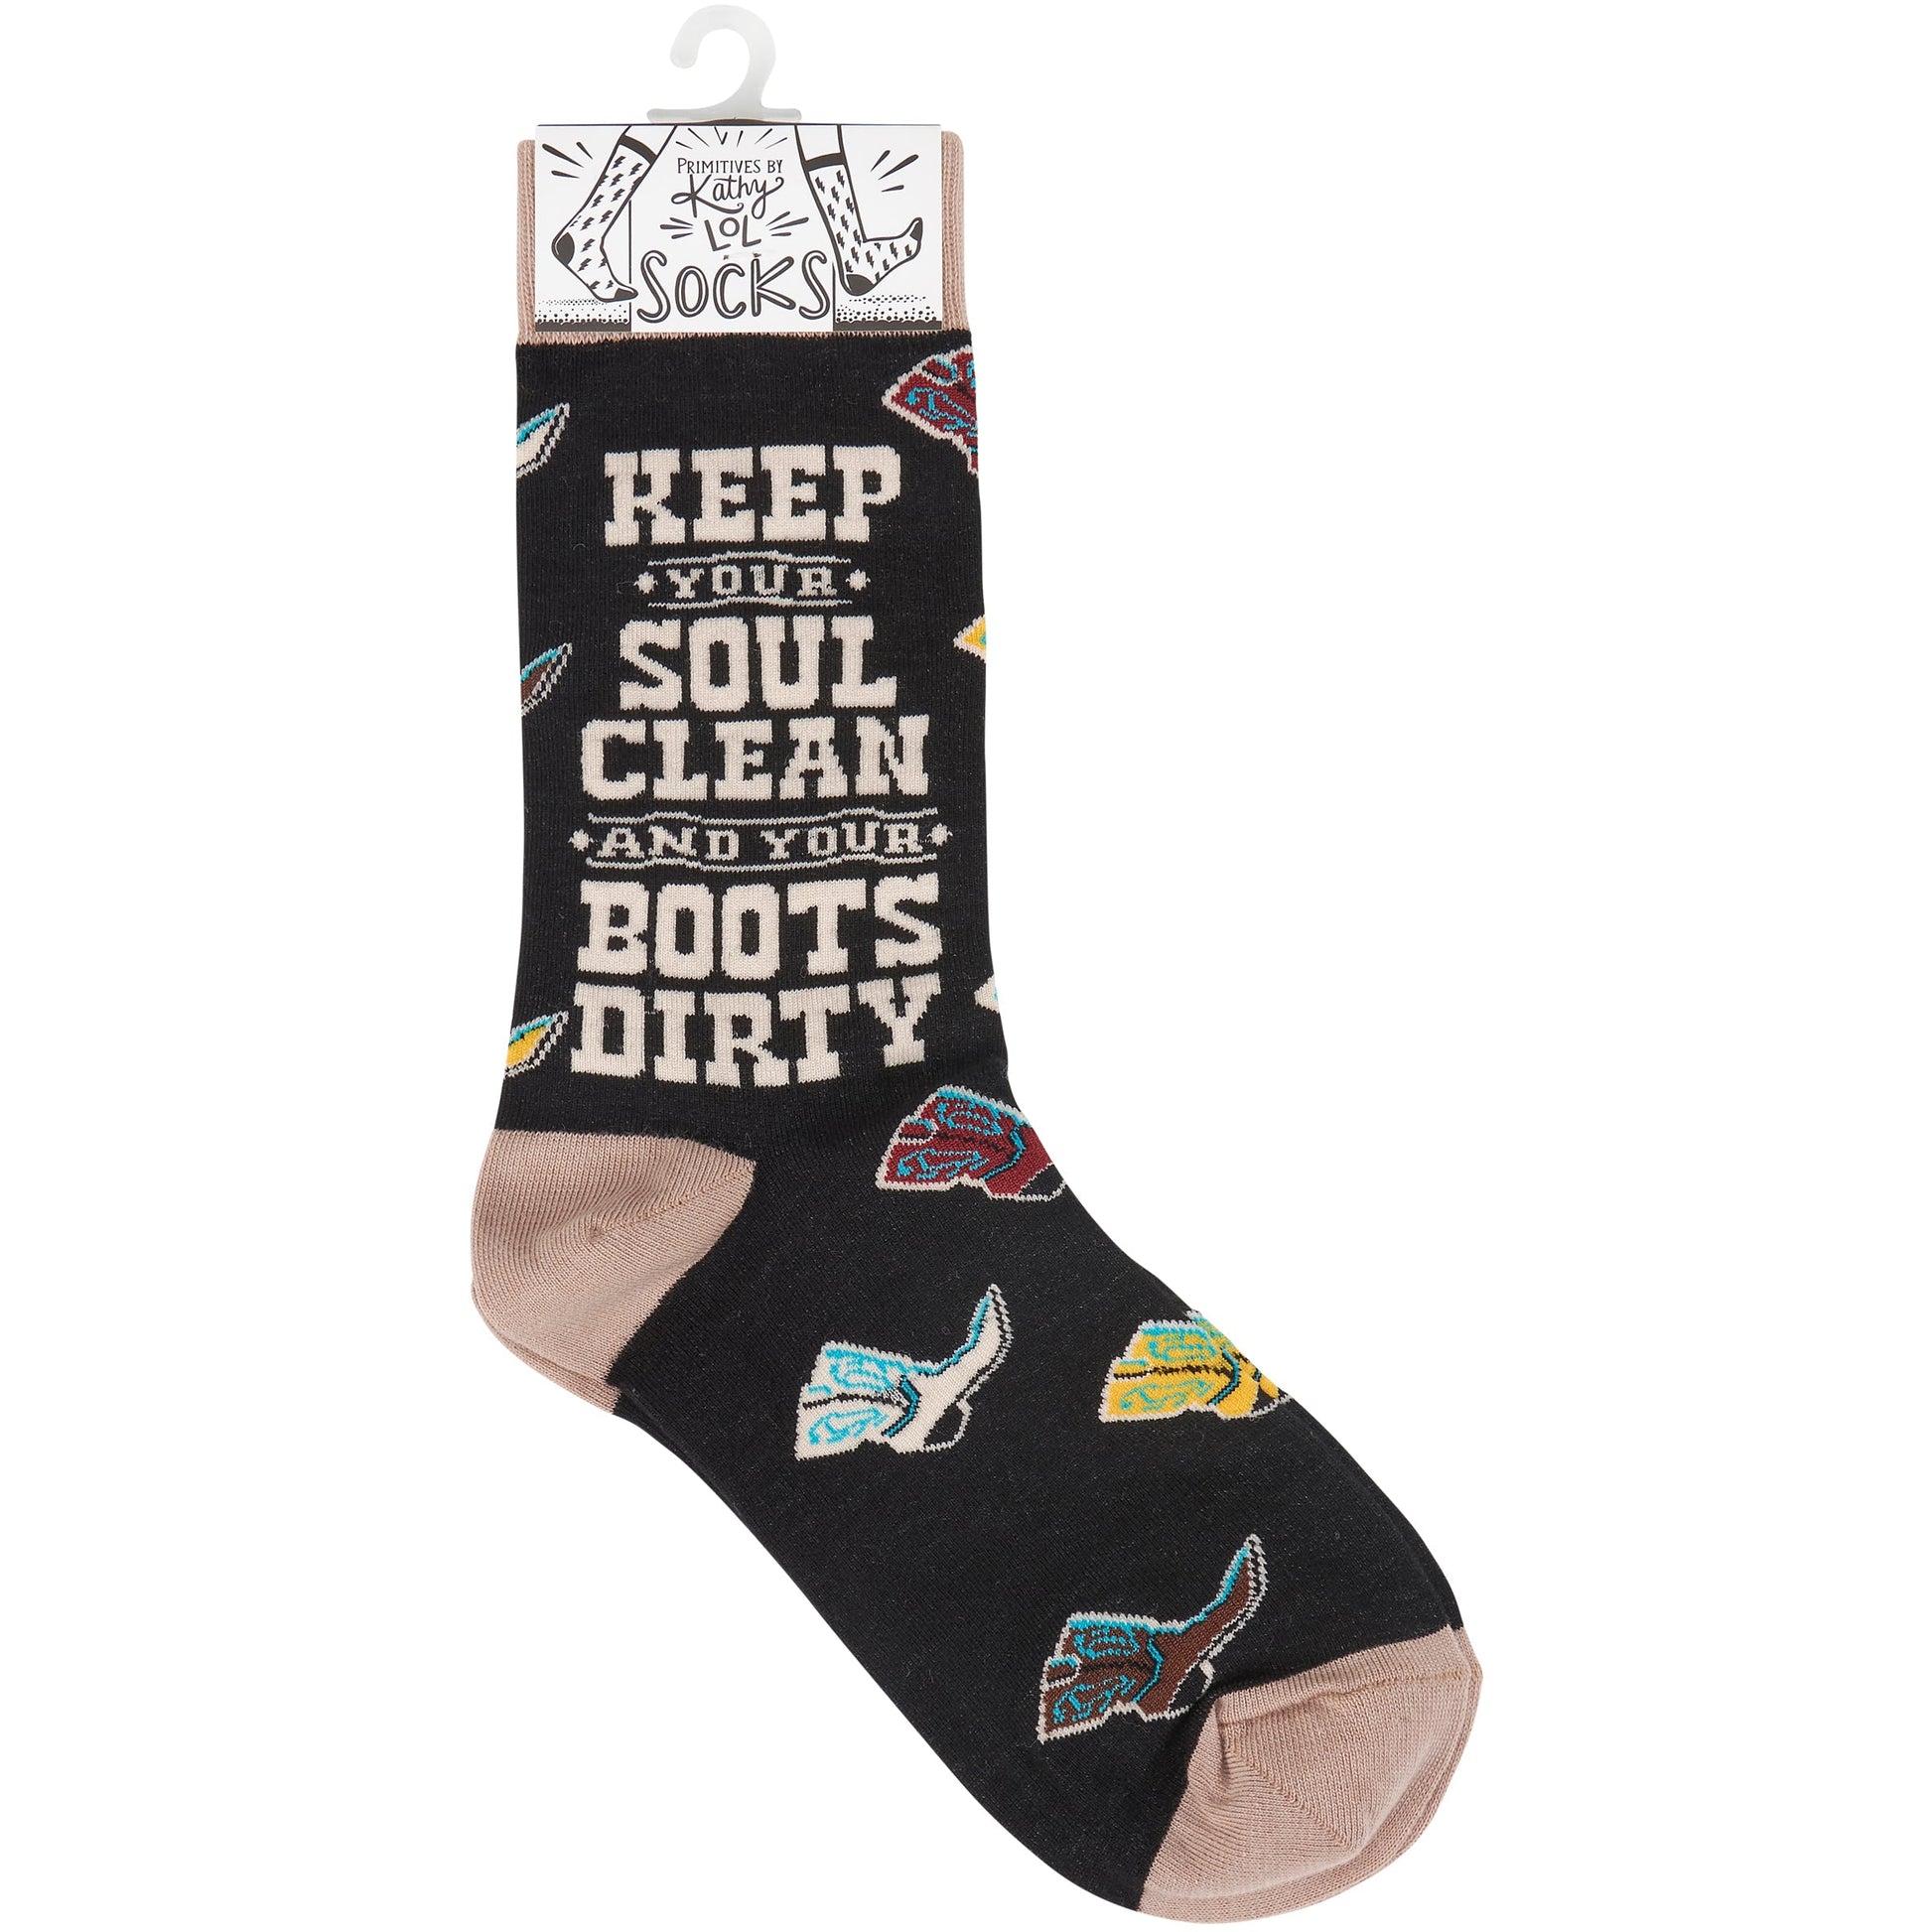 Keep Your Soul Clean And Your Boots Dirty Socks | Fun Western Themed Socks